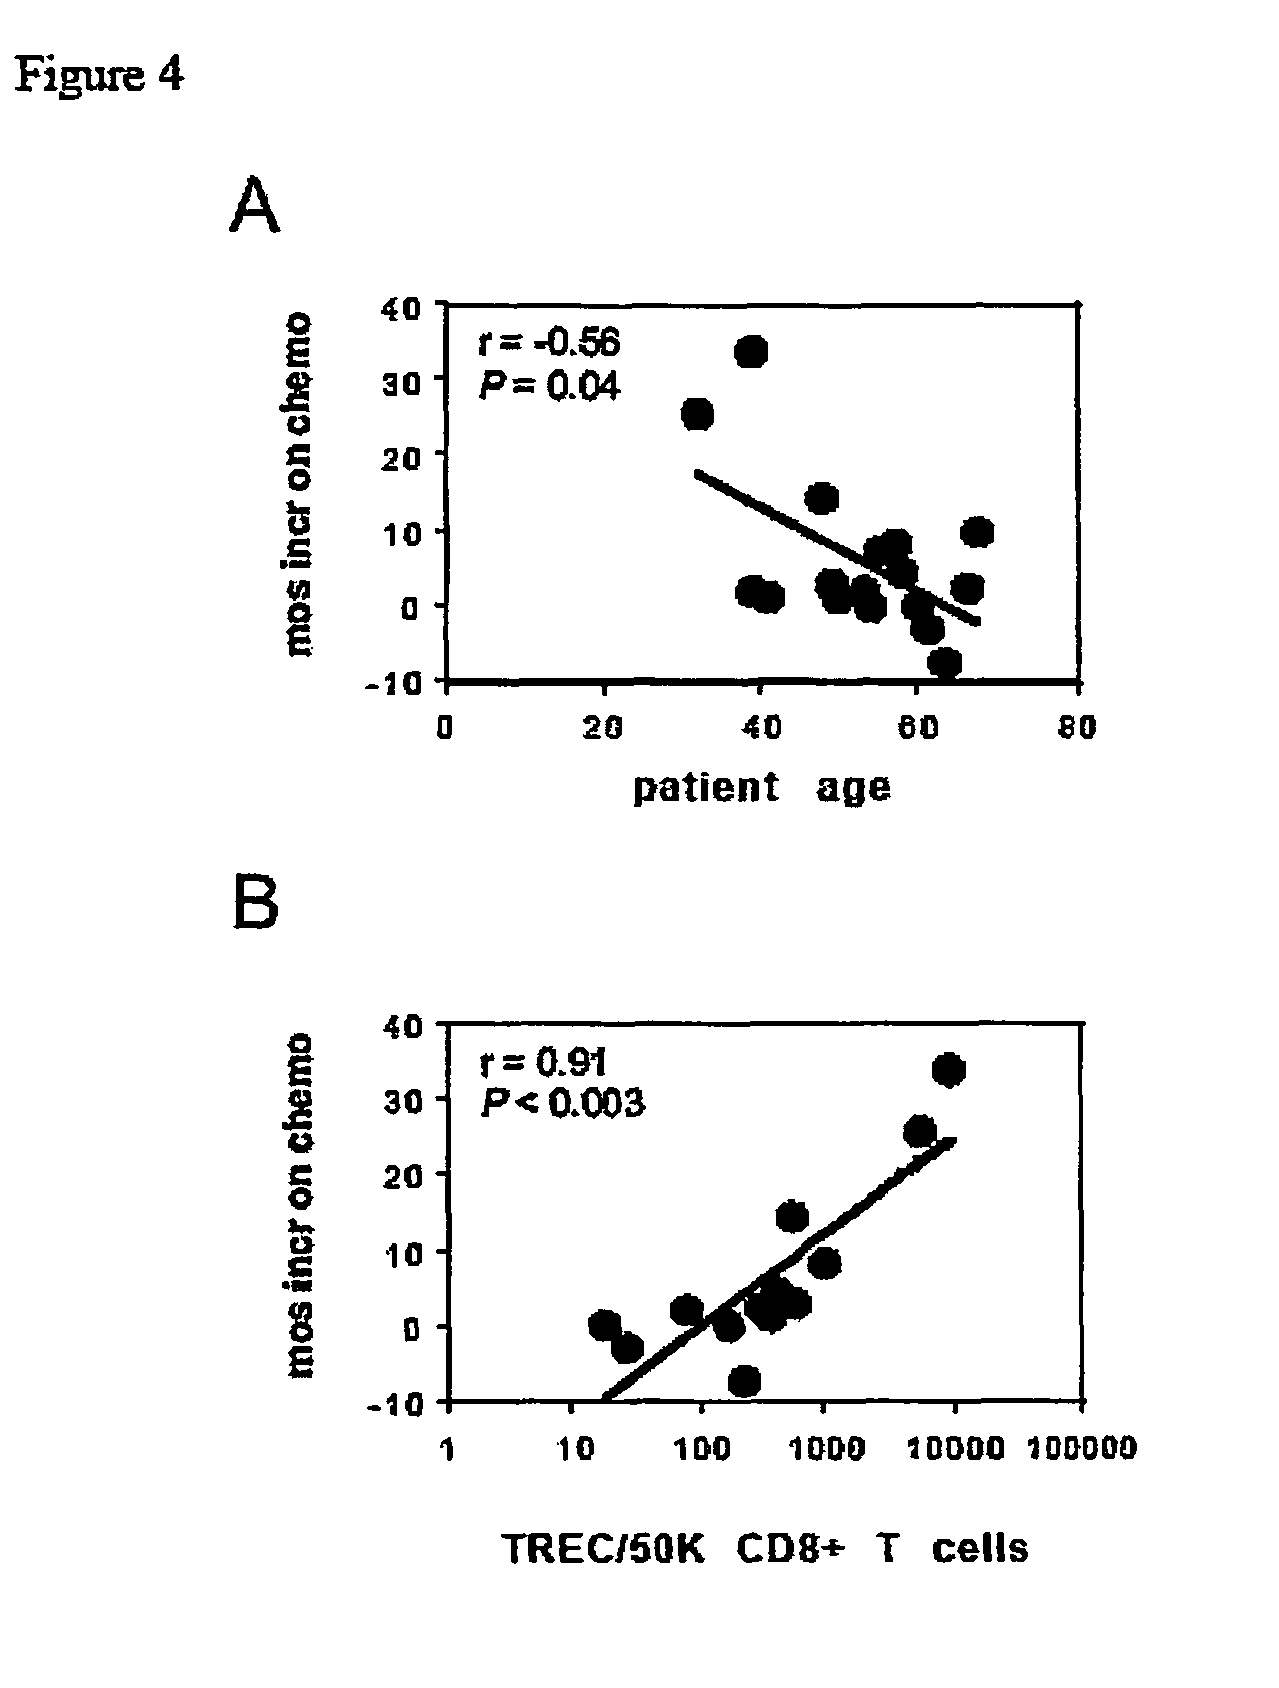 System and method for the treatment of cancer, including cancers of the central nervous system